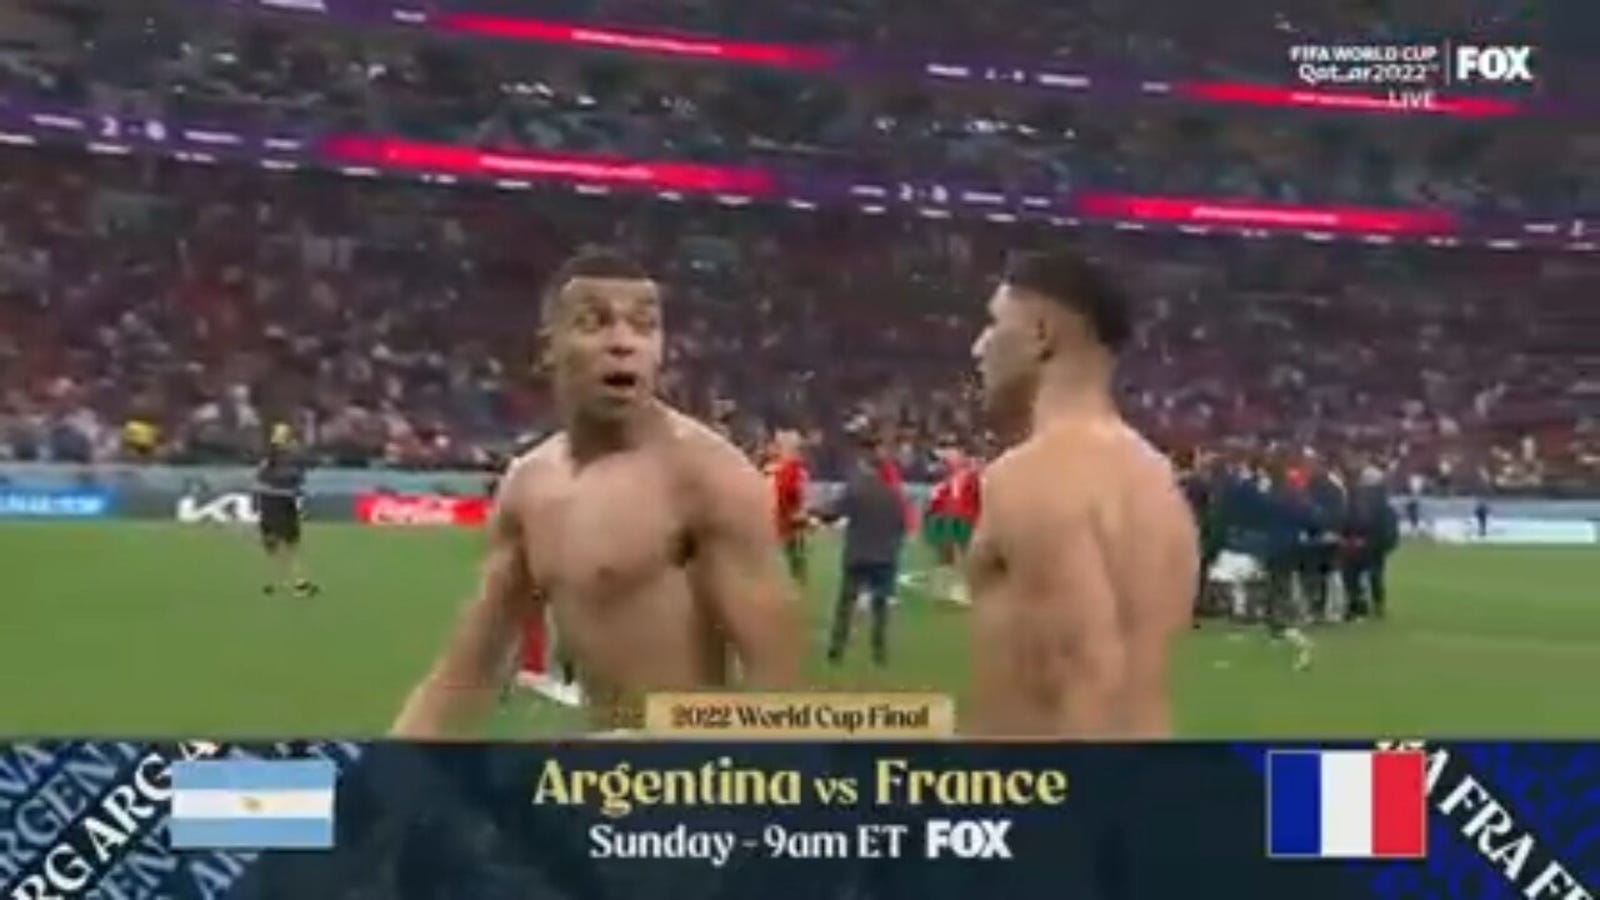 Kylian Mbappé and France celebrate after progressing to the 2022 FIFA World Cup Final